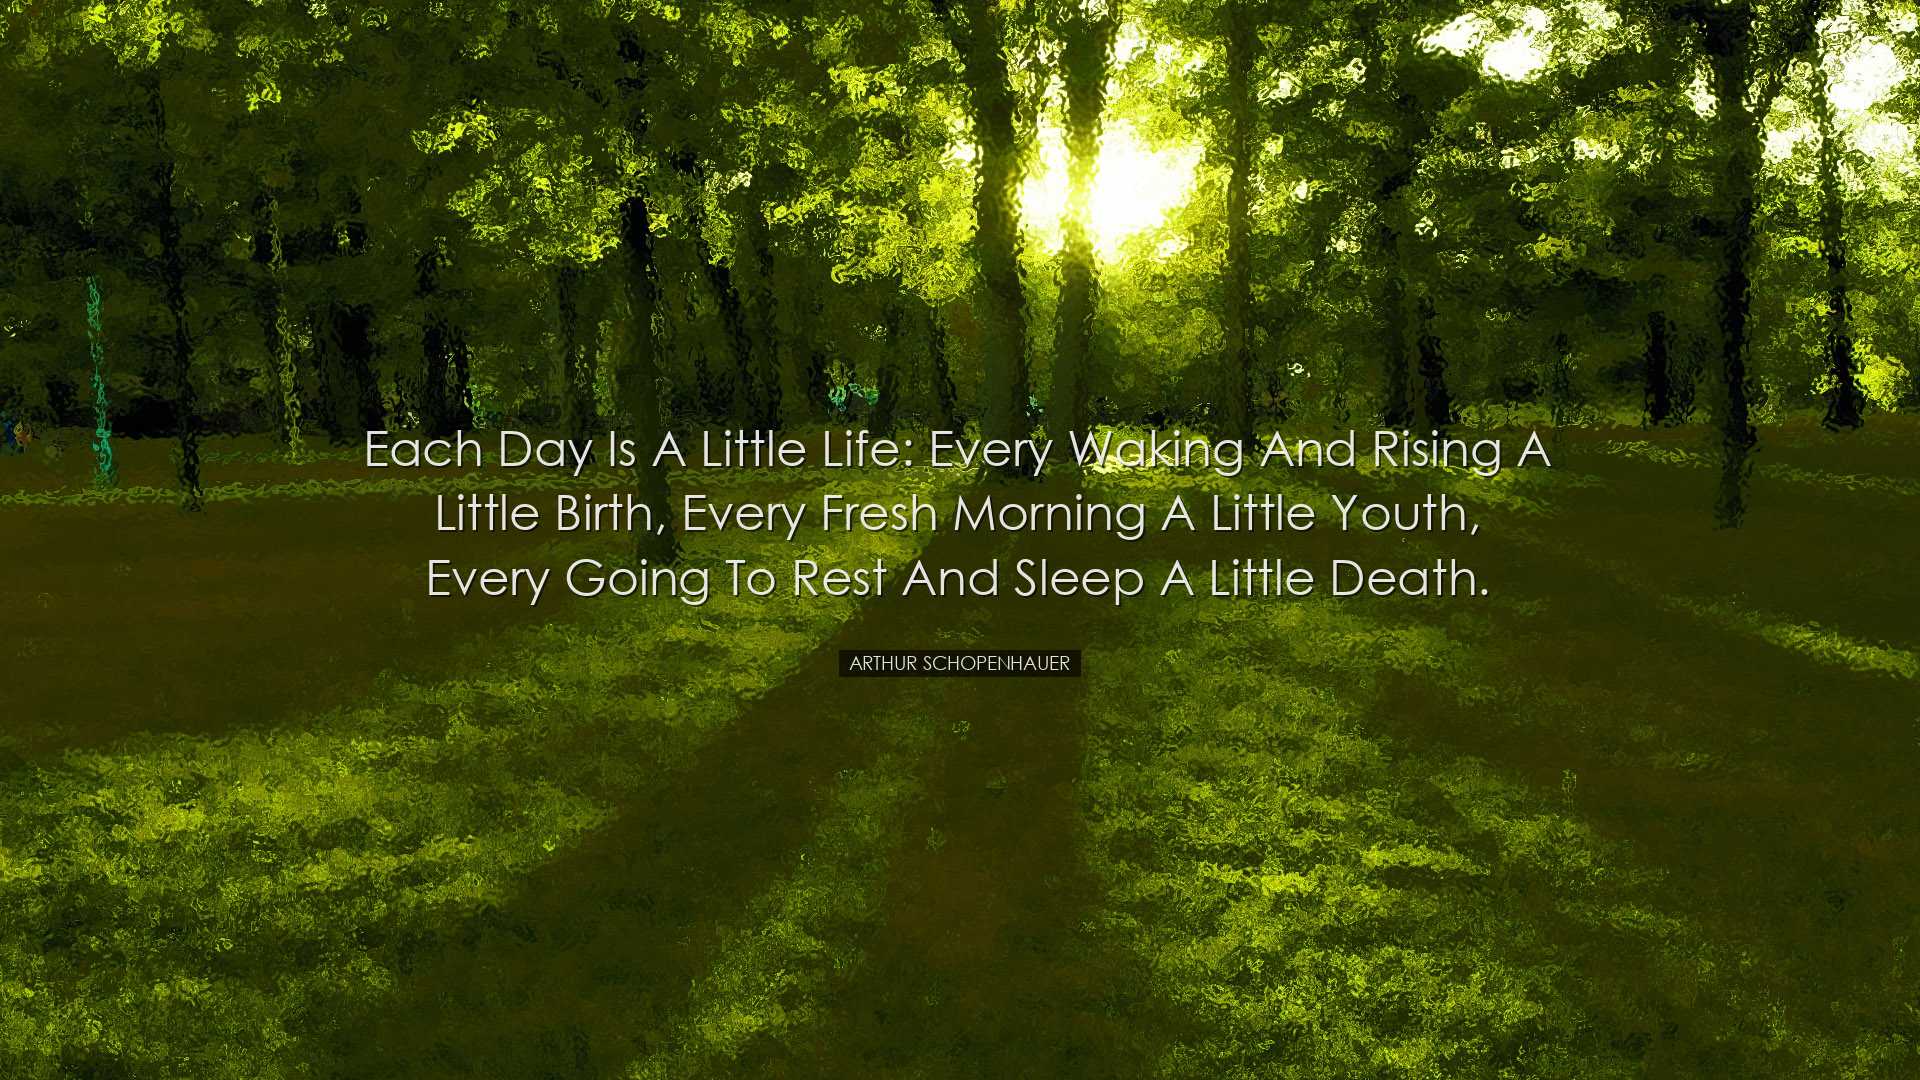 Each day is a little life: every waking and rising a little birth,